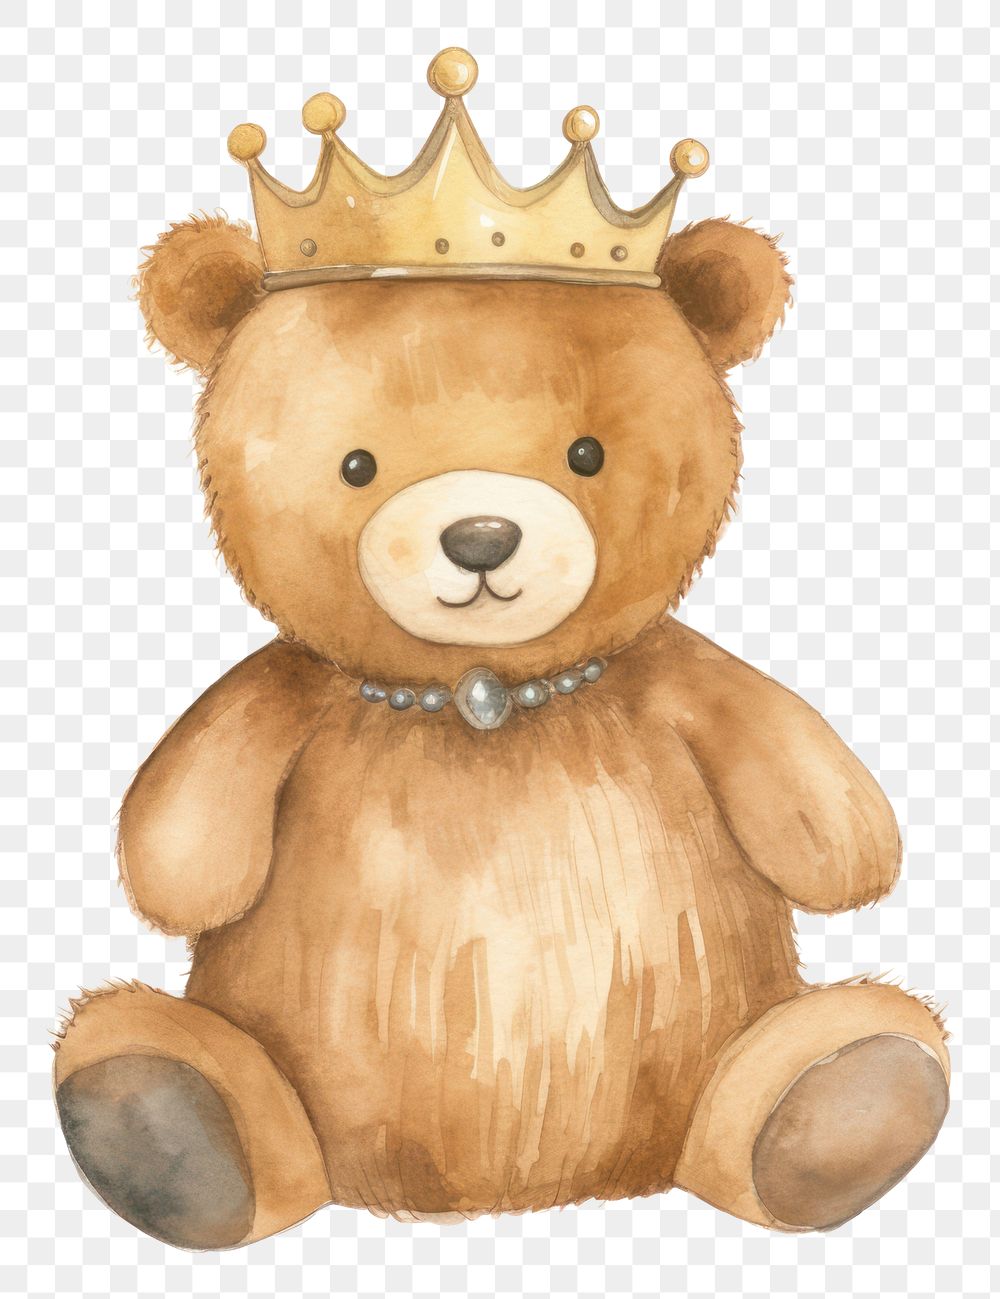 PNG Teddy bear crown toy white background.